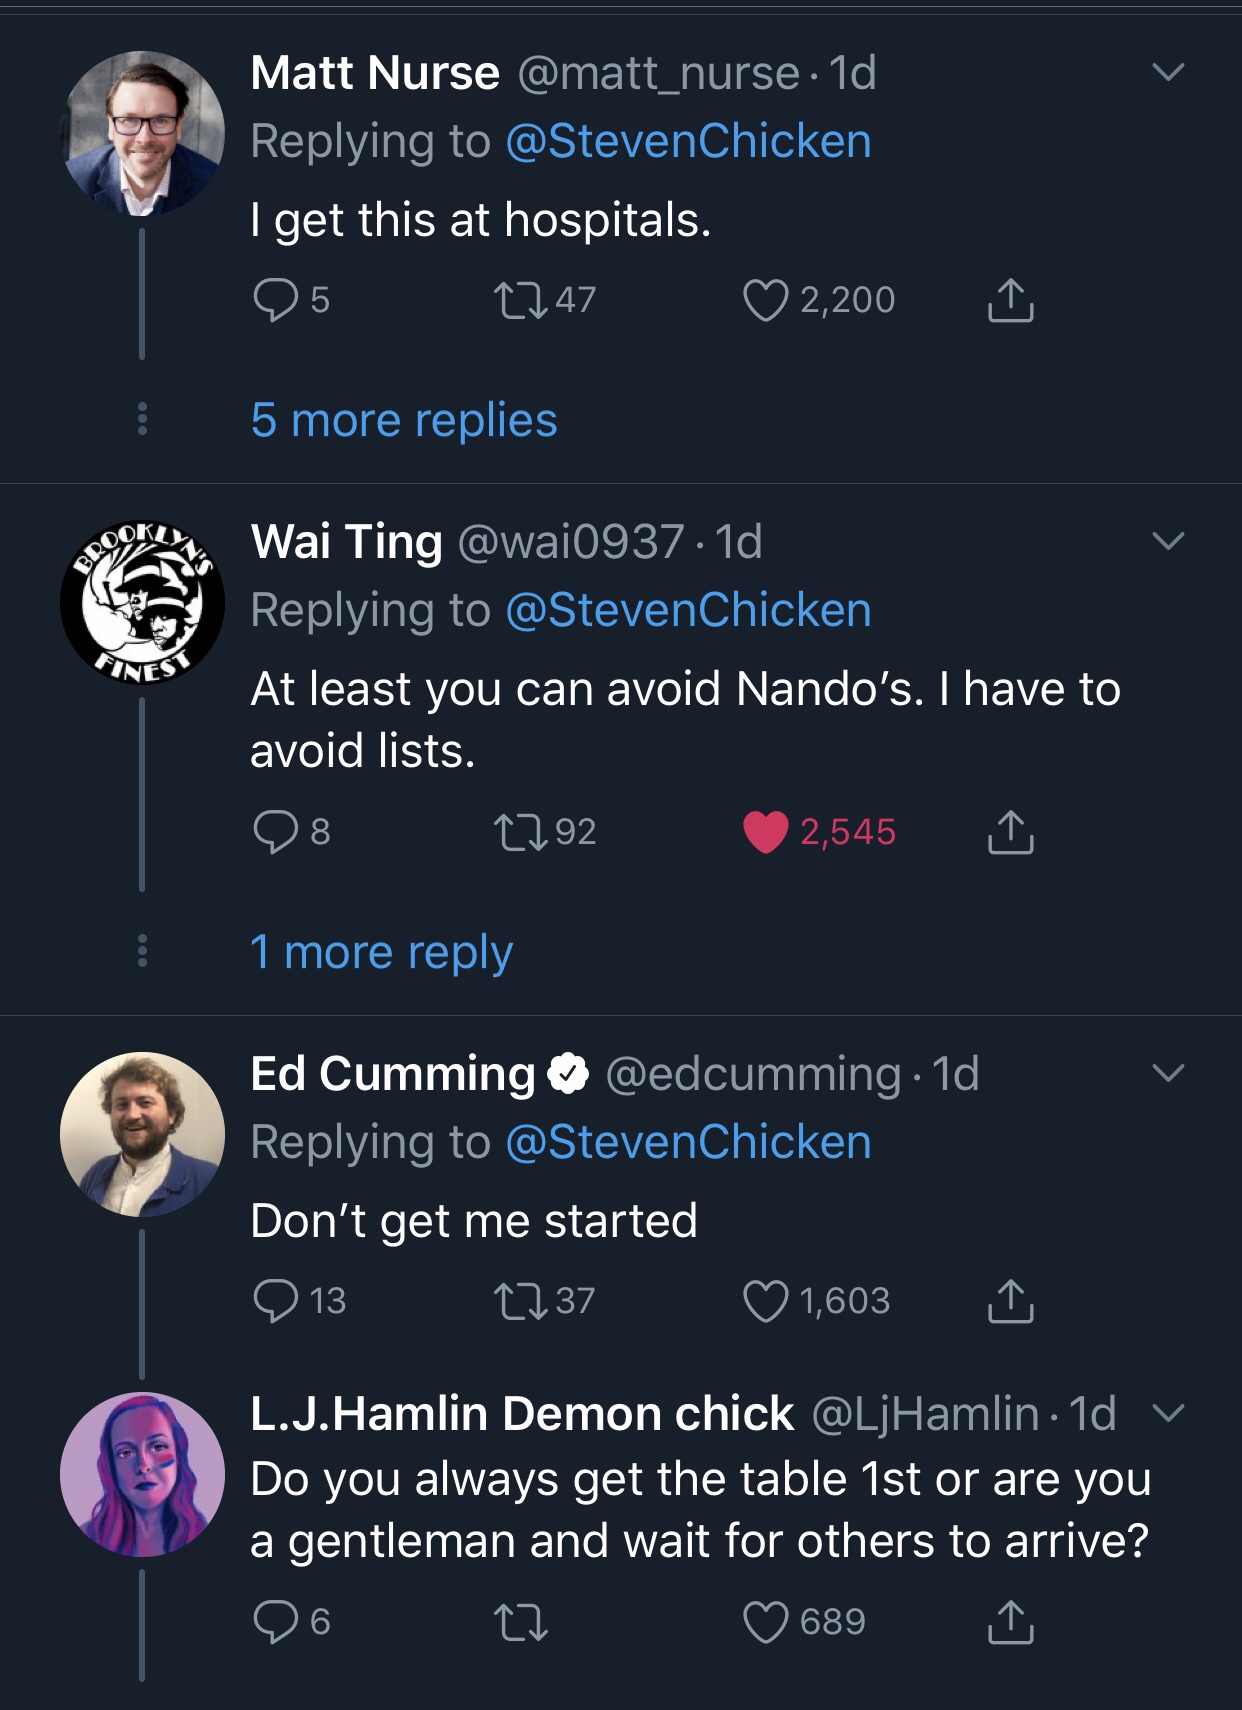 screenshot - Matt Nurse . 1d I get this at hospitals. 25 2747 2,200 I 5 more replies Be Fin Wai Ting .1d At least you can avoid Nando's. I have to avoid lists. 98 2292 2,545 1 more V Ed Cumming . 1d Chicken Don't get me started 913 2237 1,603 L.J.Hamlin D